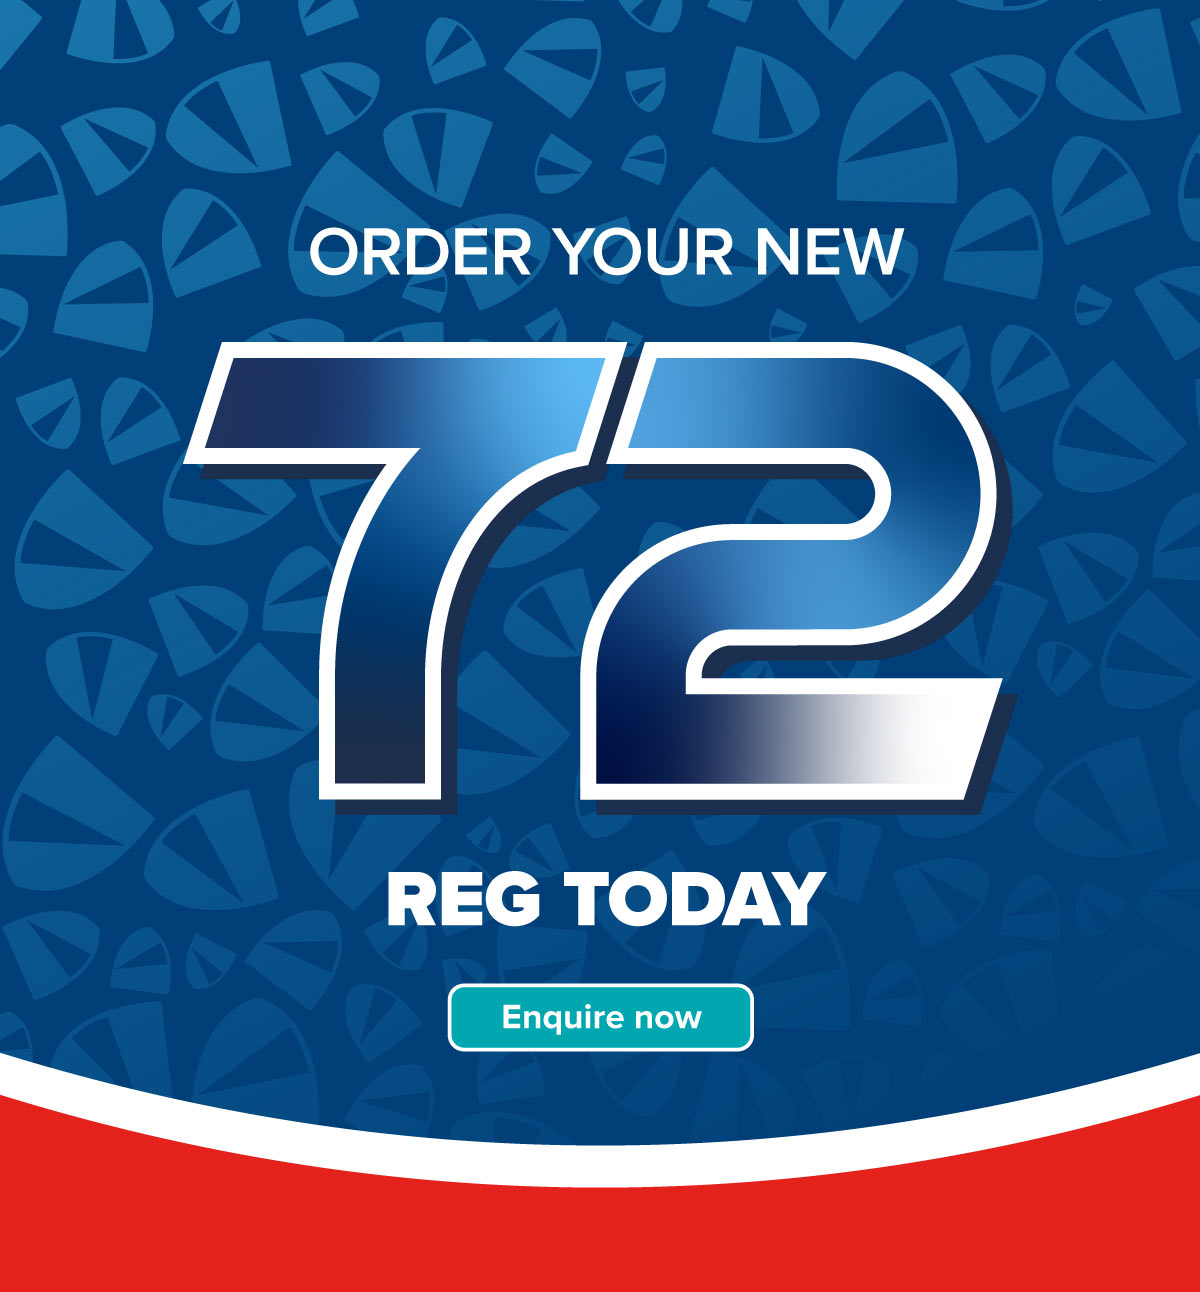 72 Reg - Order Your New Car Today